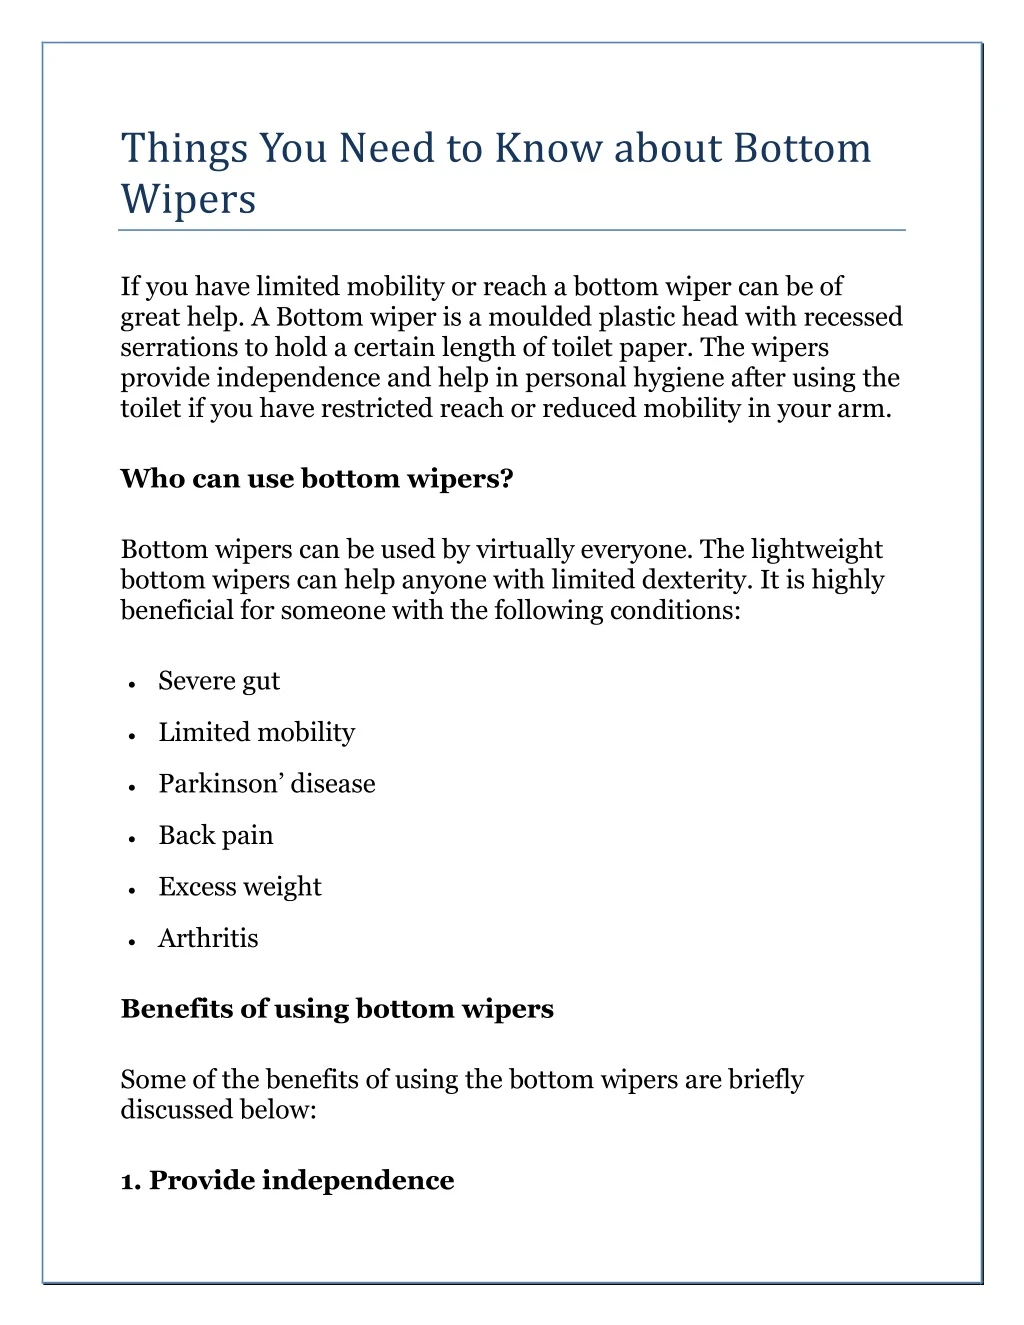 things you need to know about bottom wipers